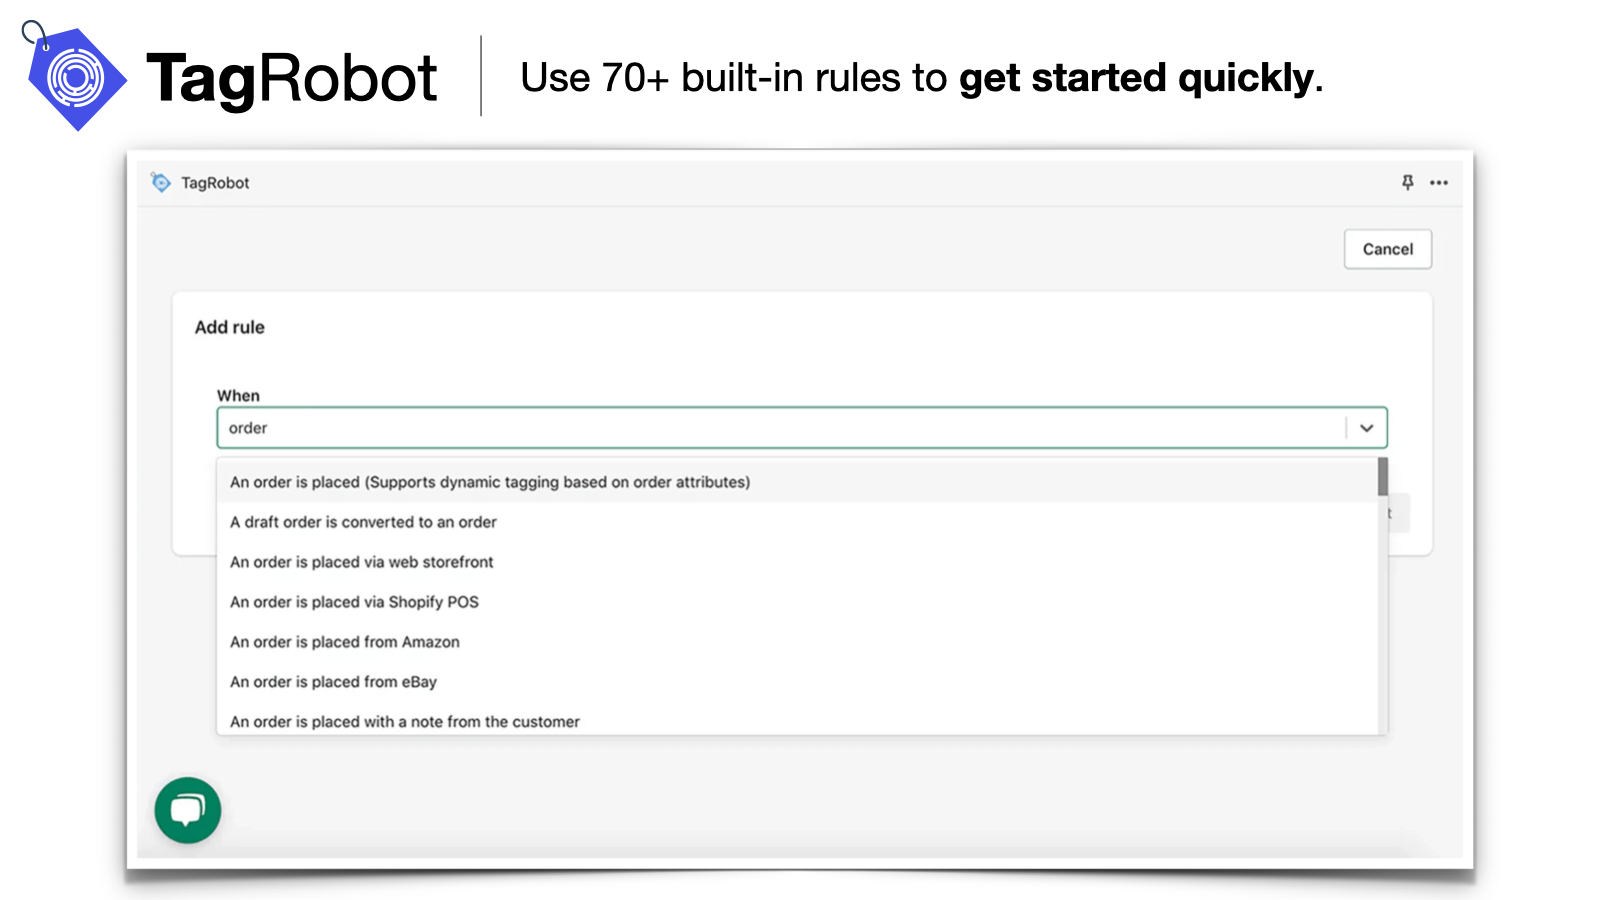 Use 70+ built-in rules to get started quickly